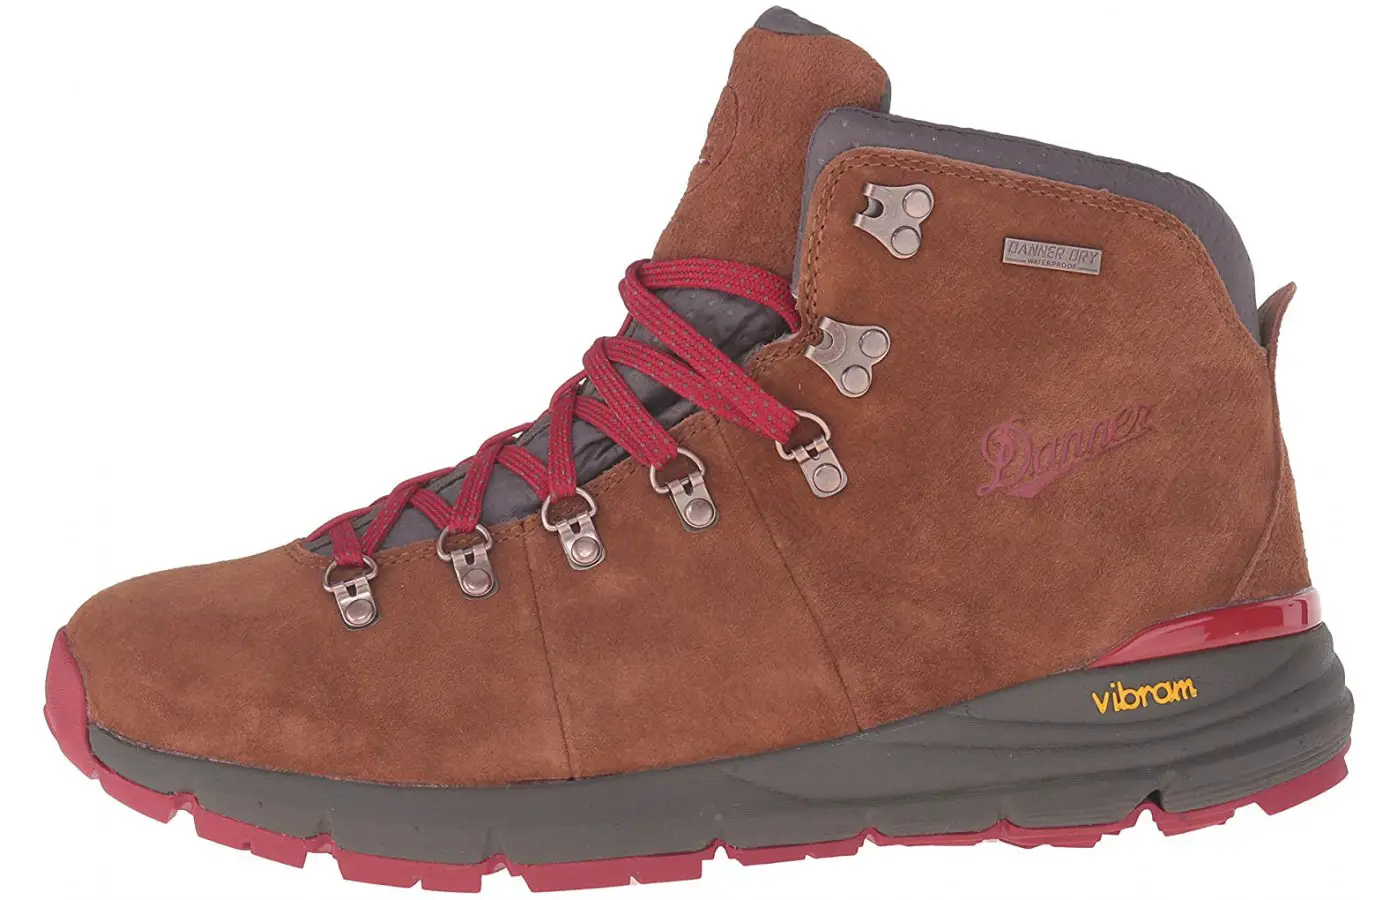 This Mountain 600 has a suede upper, but there are also styles in traditional leather.